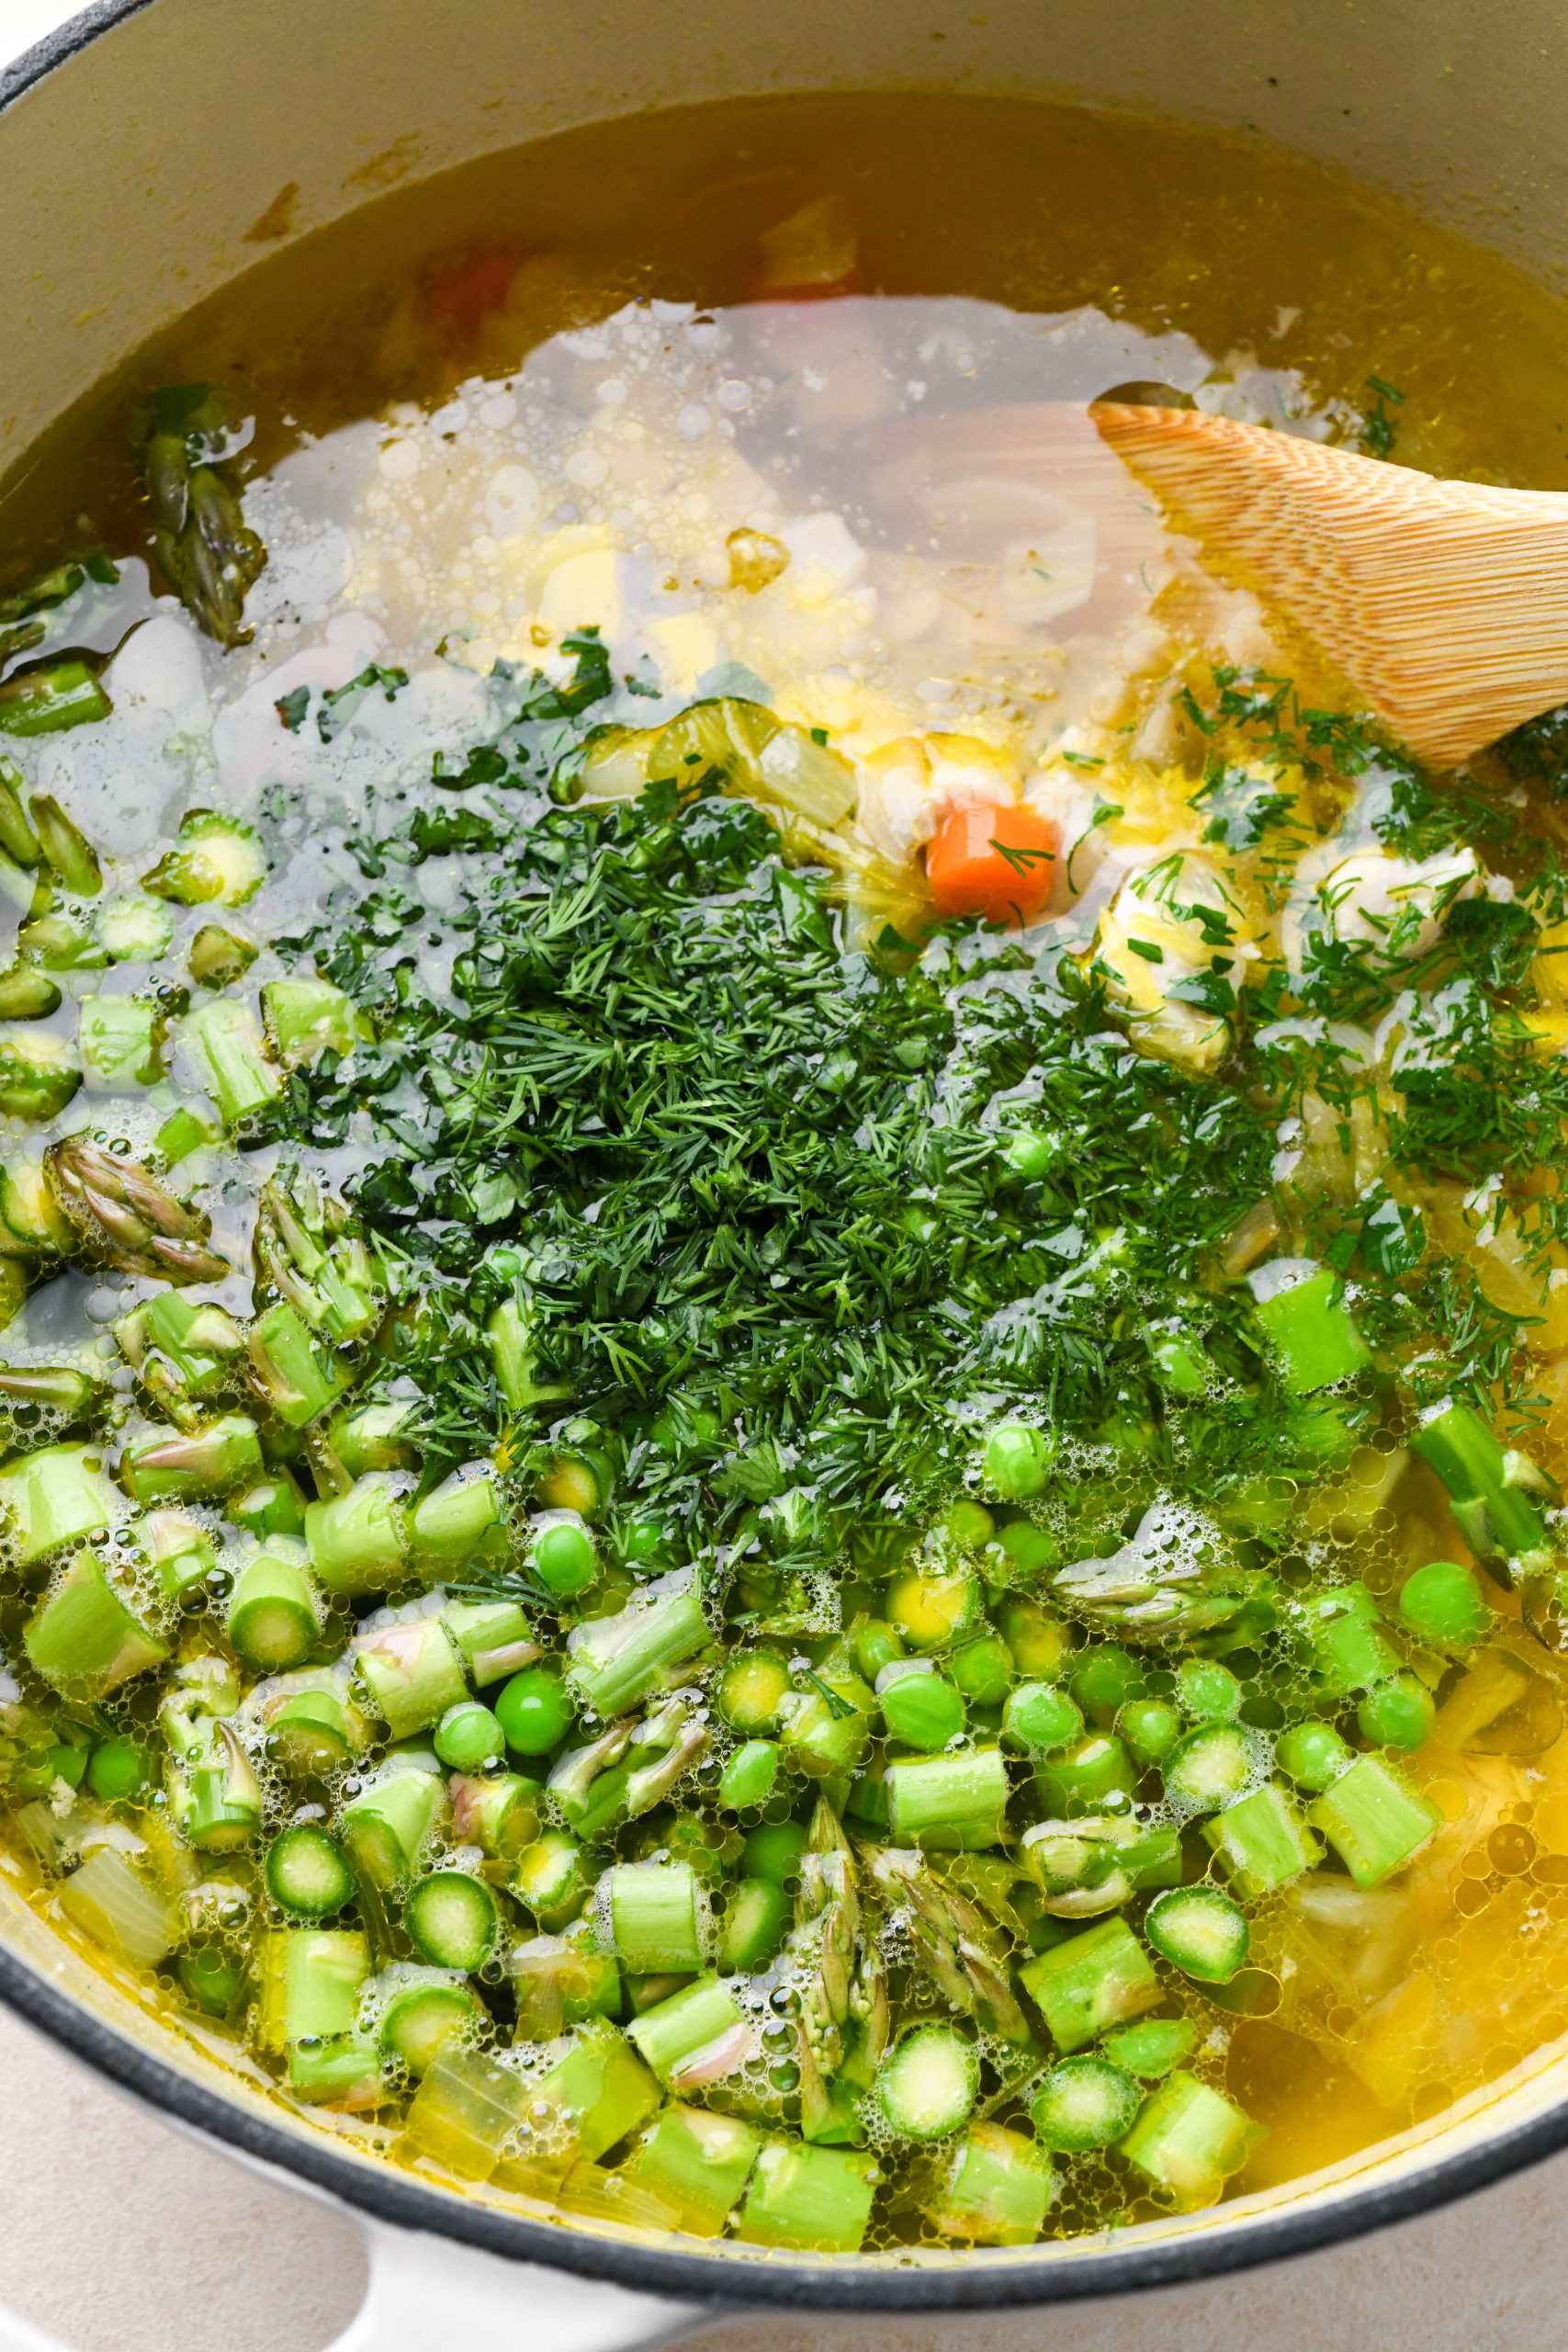 How to make chicken soup with spring vegetables: Diced chicken returned to the pot along with peas, asparagus, and fresh herbs.